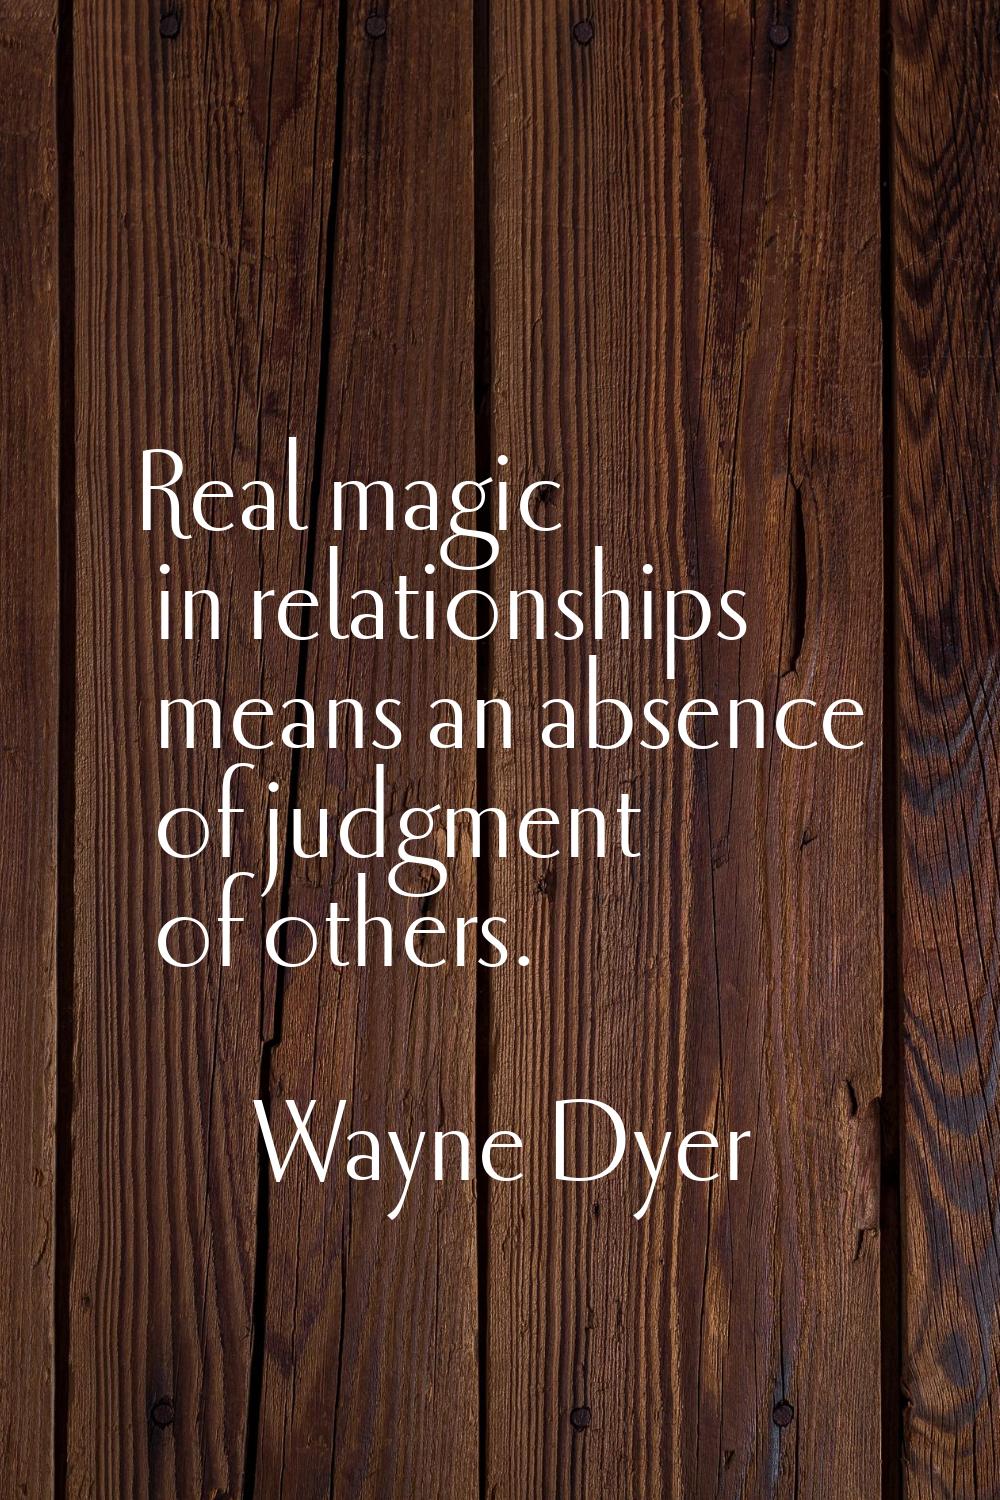 Real magic in relationships means an absence of judgment of others.